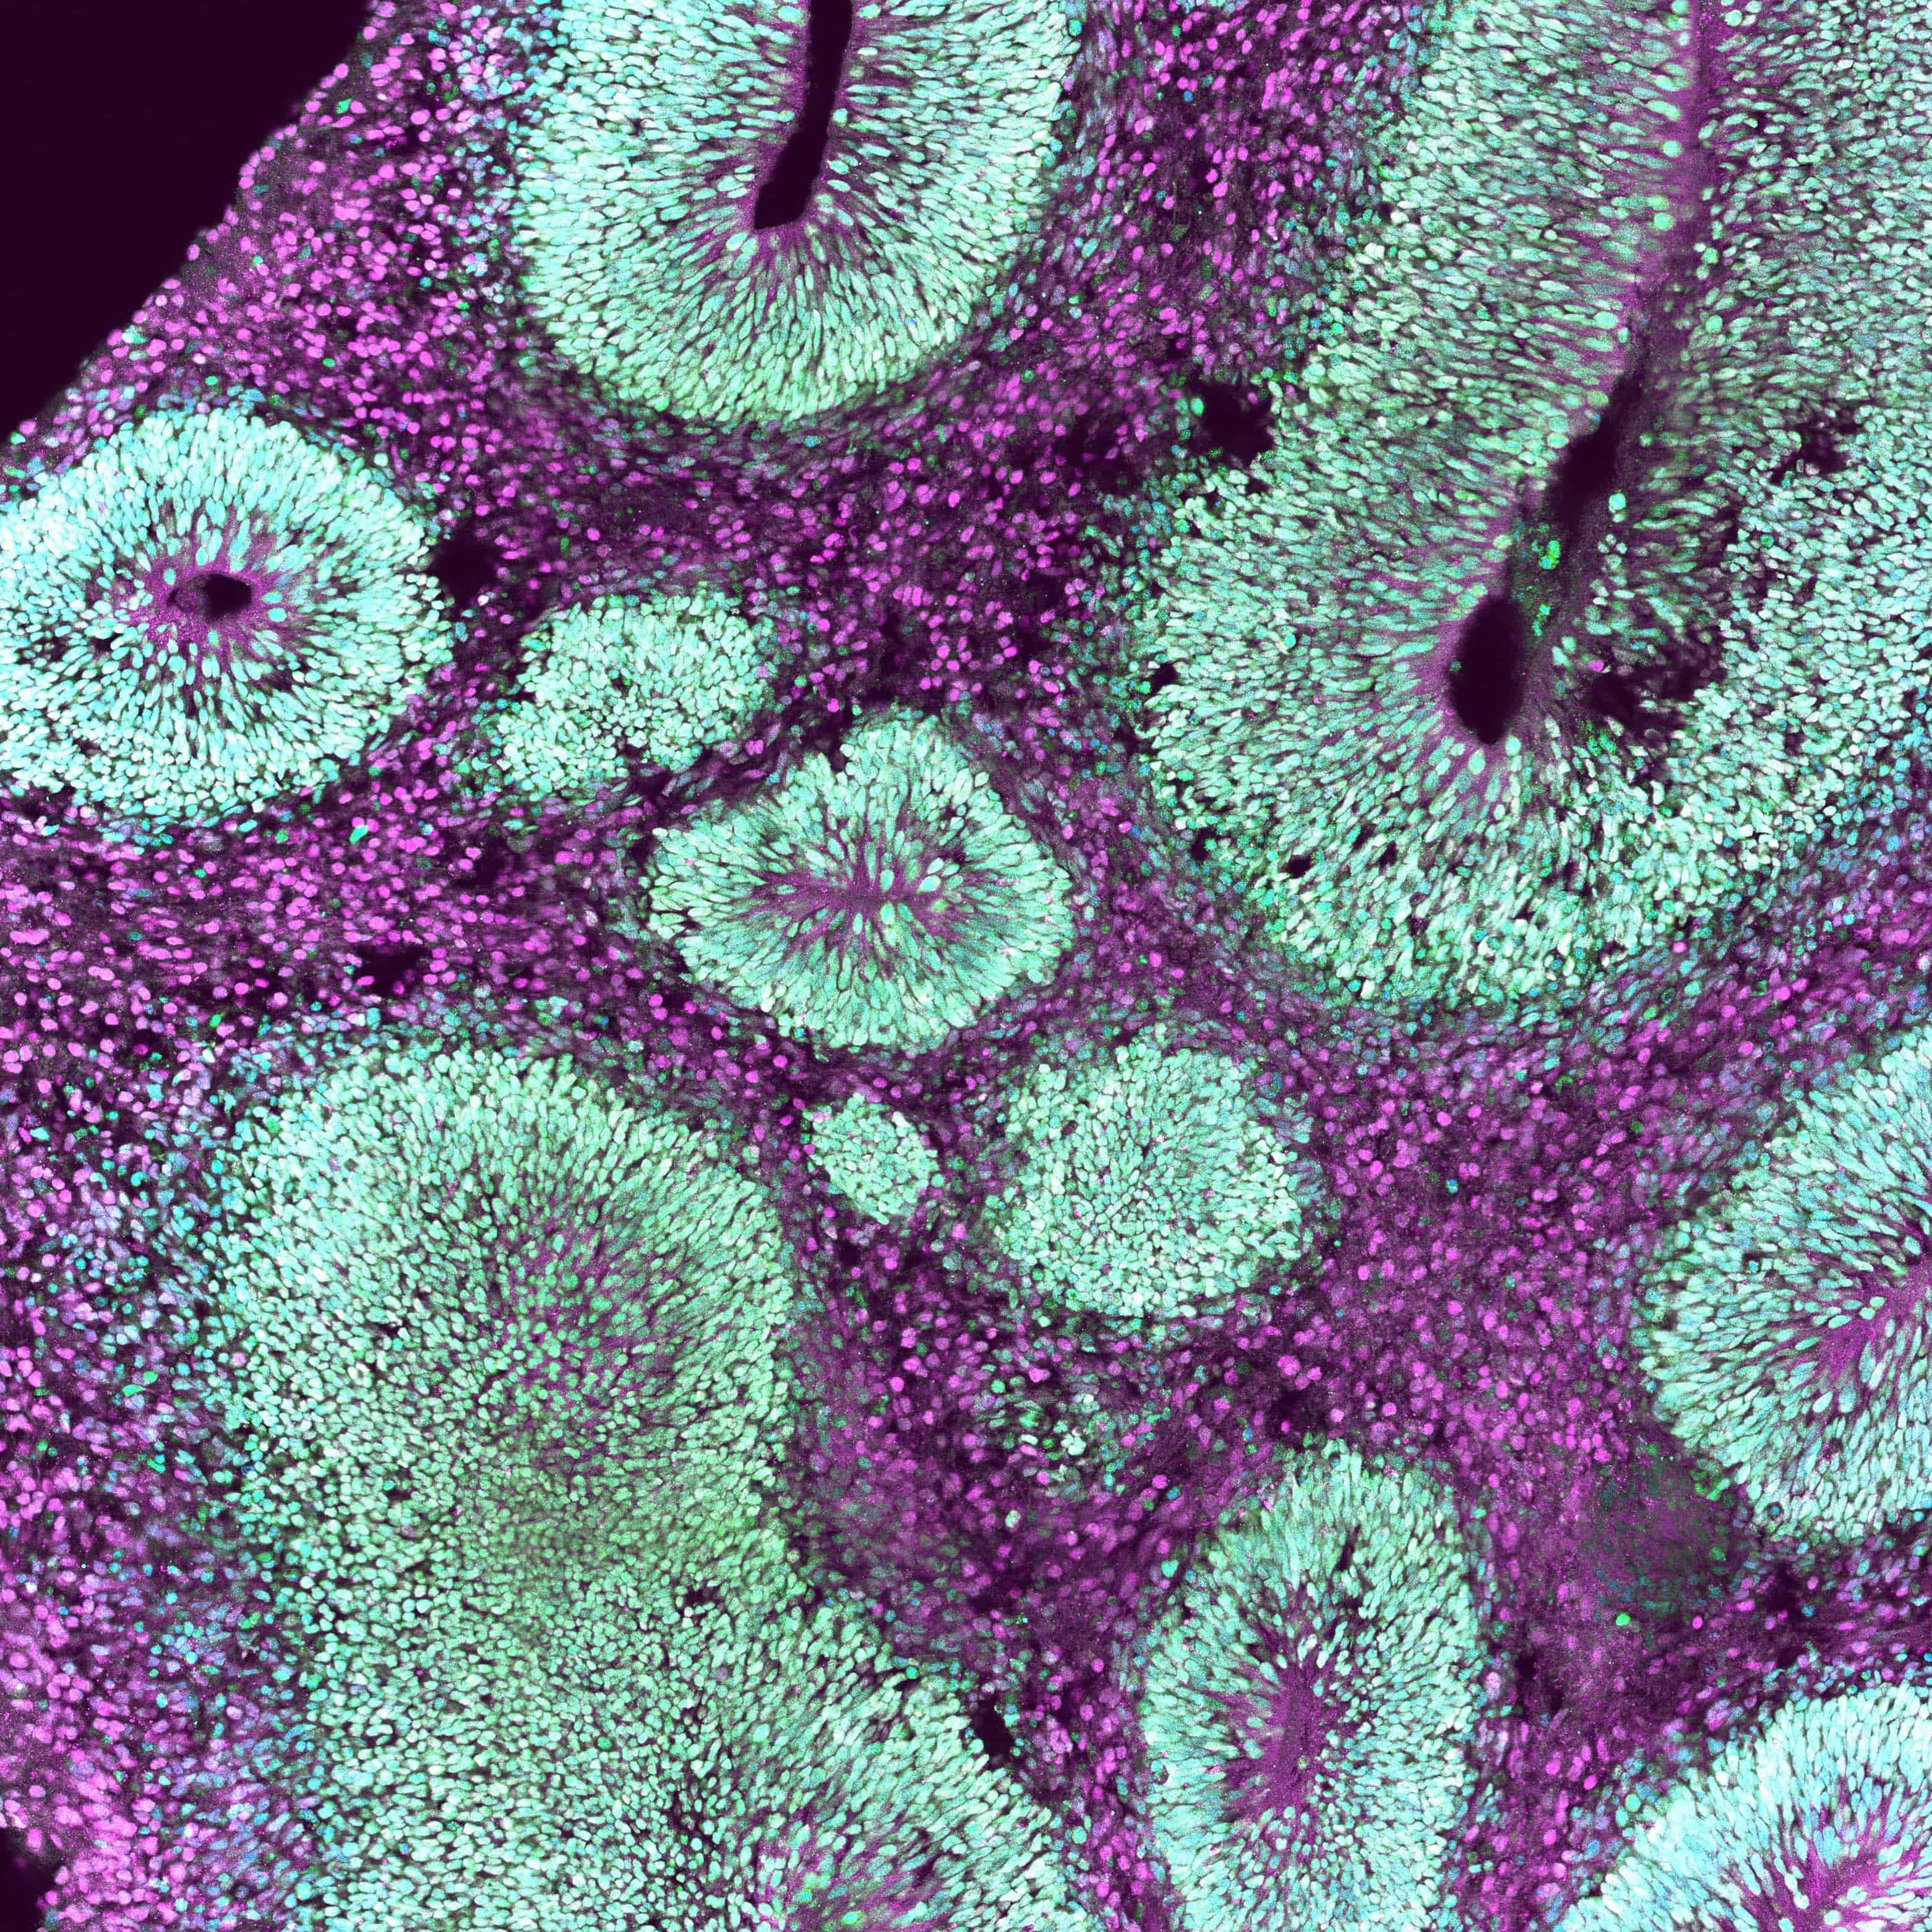 Purple and green dots from a stained section of cultured brain organoid tissue. The dots are nuclei of each cell arranged in circular groups.